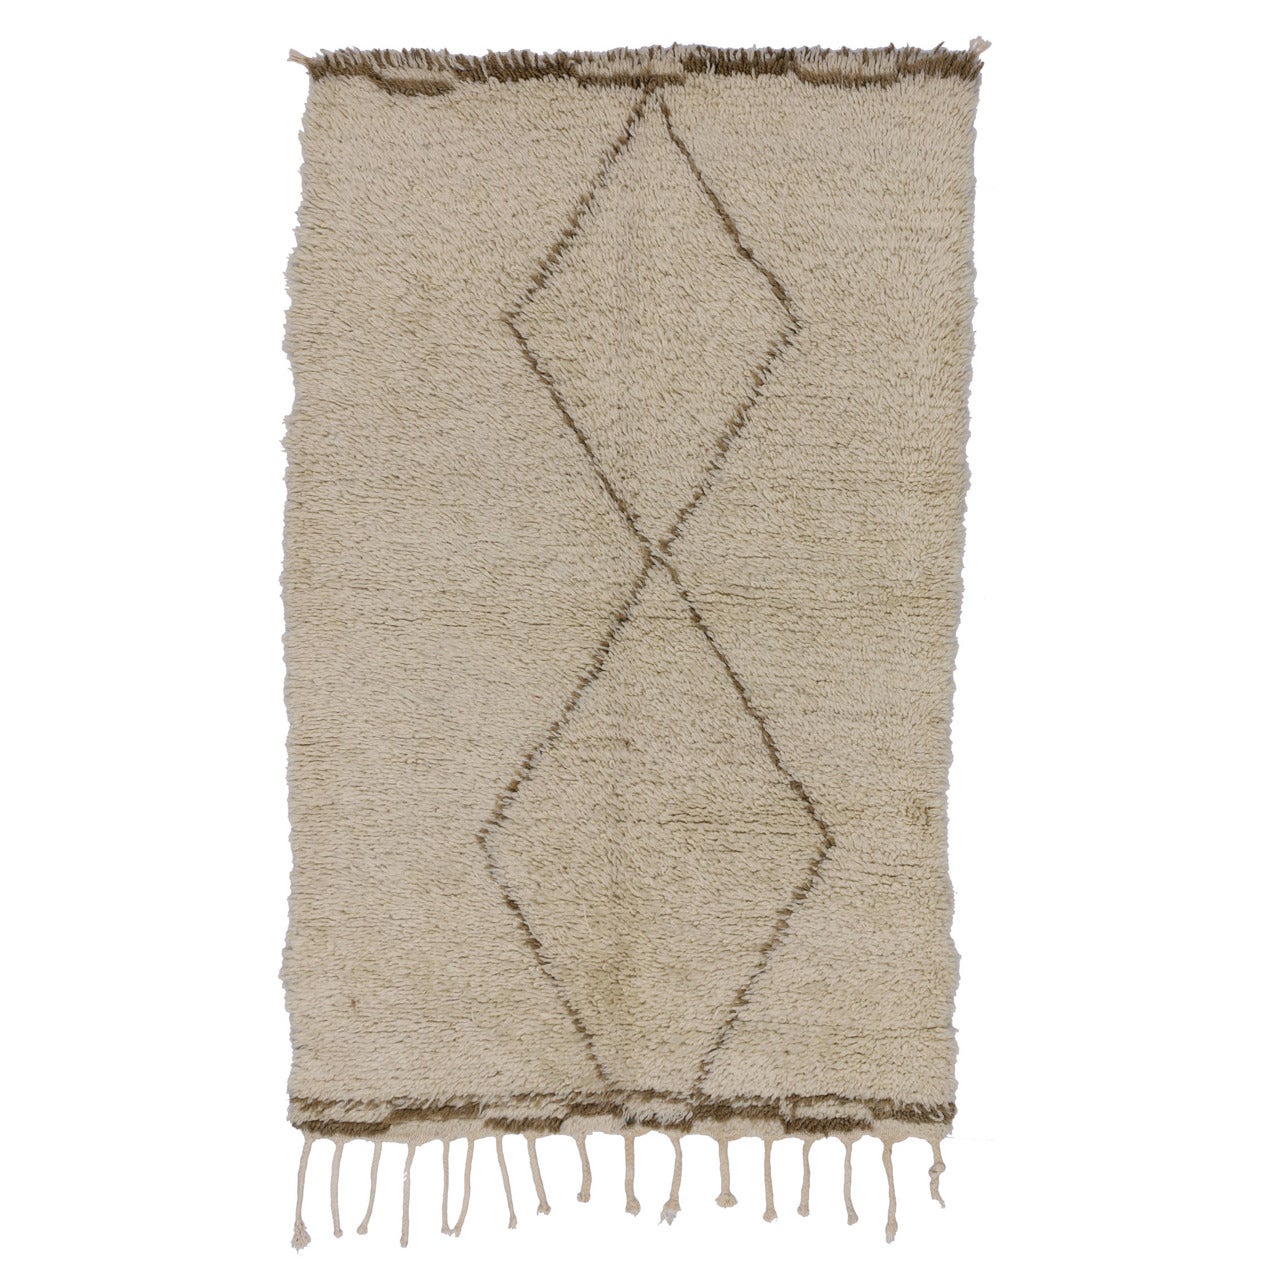 Vintage Beni Ourain Moroccan Rug with Minimalist Appeal and Modern Design